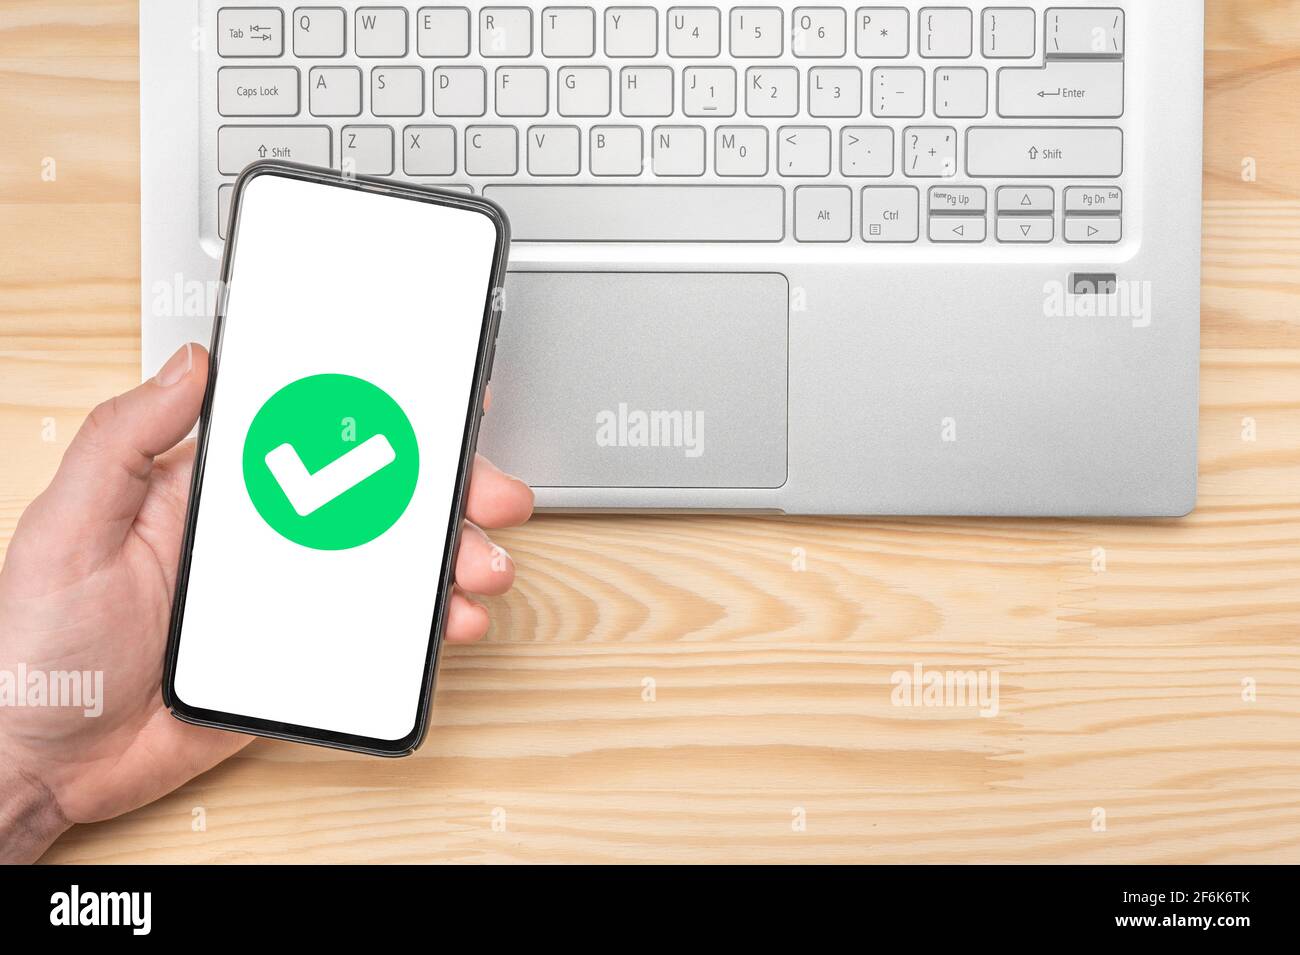 cell phone confirmation. Smartphone with green checkmark on screen, validated, confirmed, completed, approved. Confirmed Smartphone Order Success. han Stock Photo